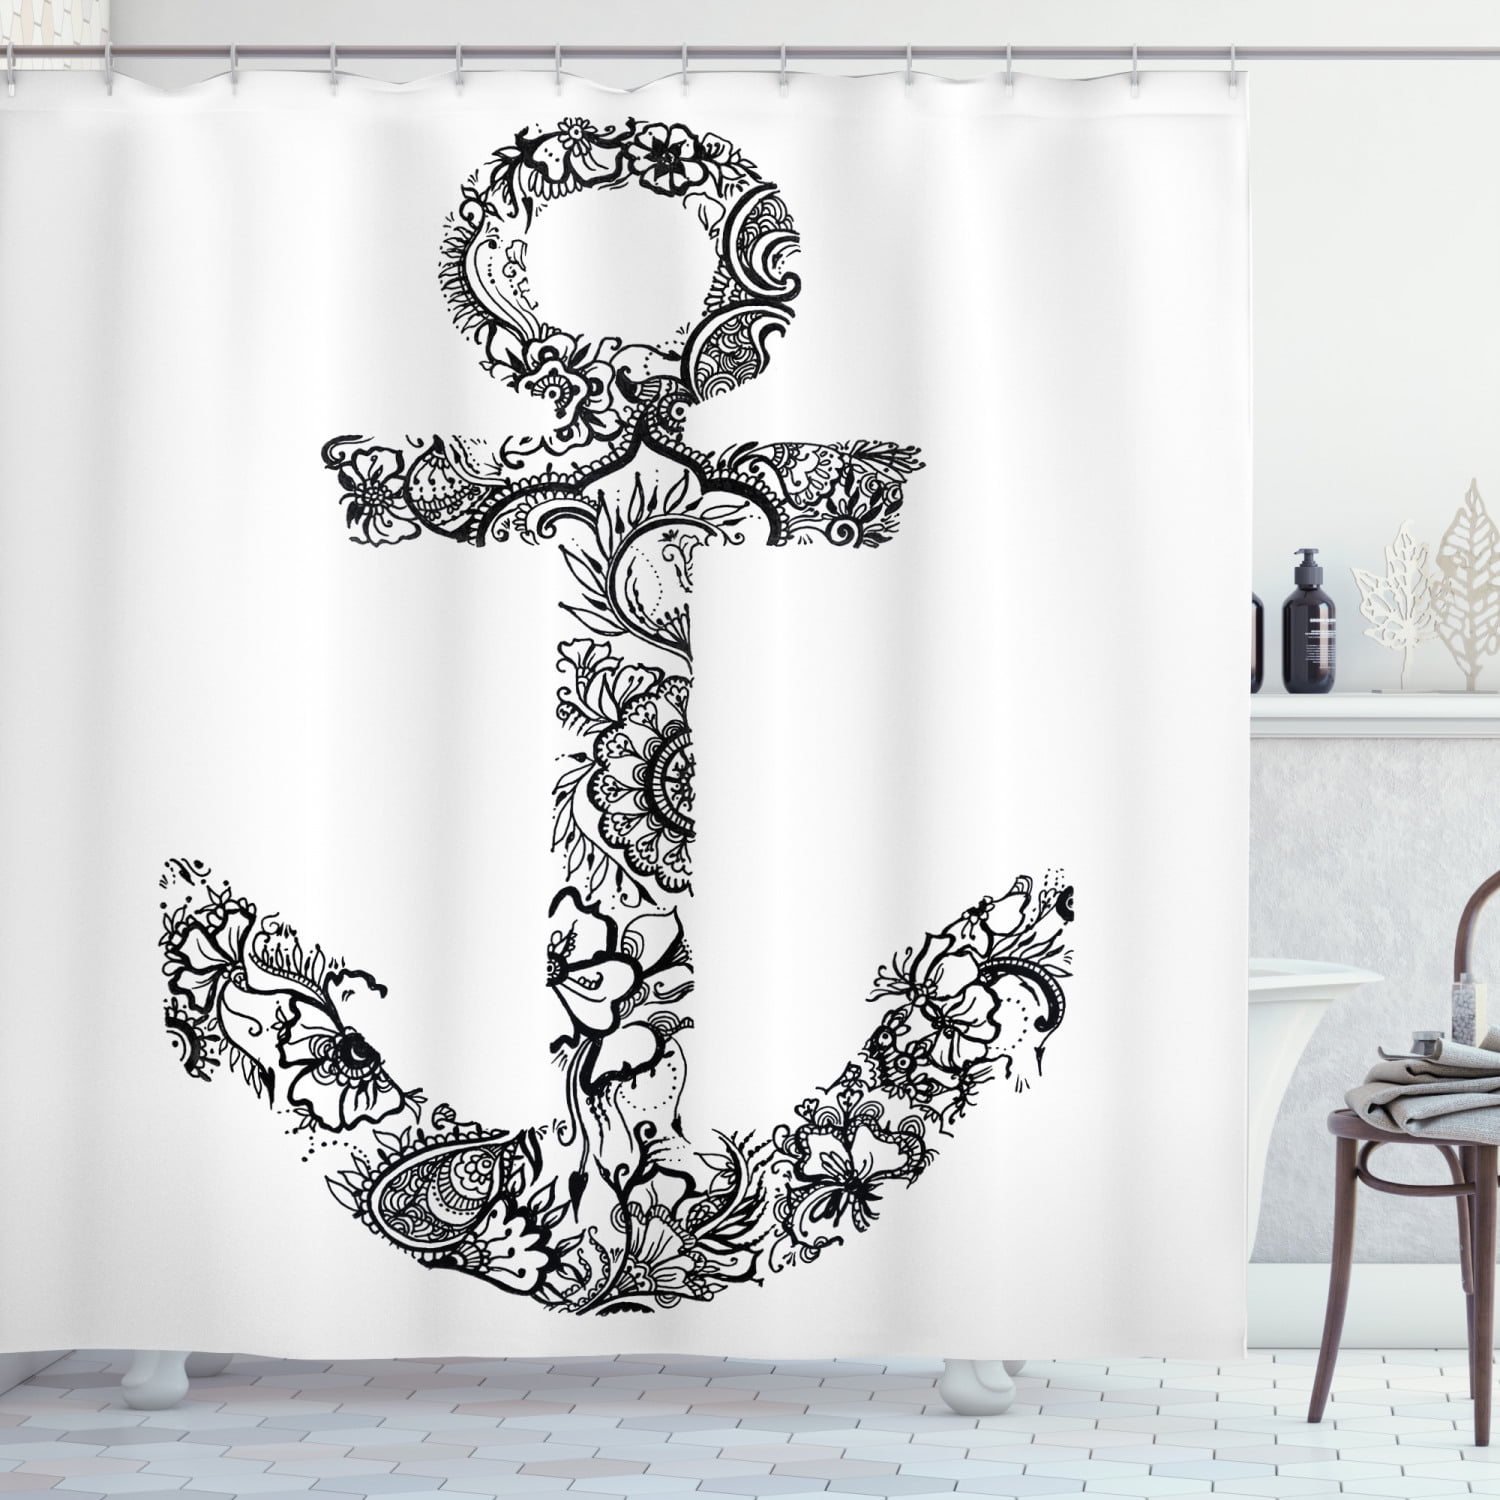 Home is where you drop your anchor Shower Curtain Waterproof Fabric w/12 Hooks 